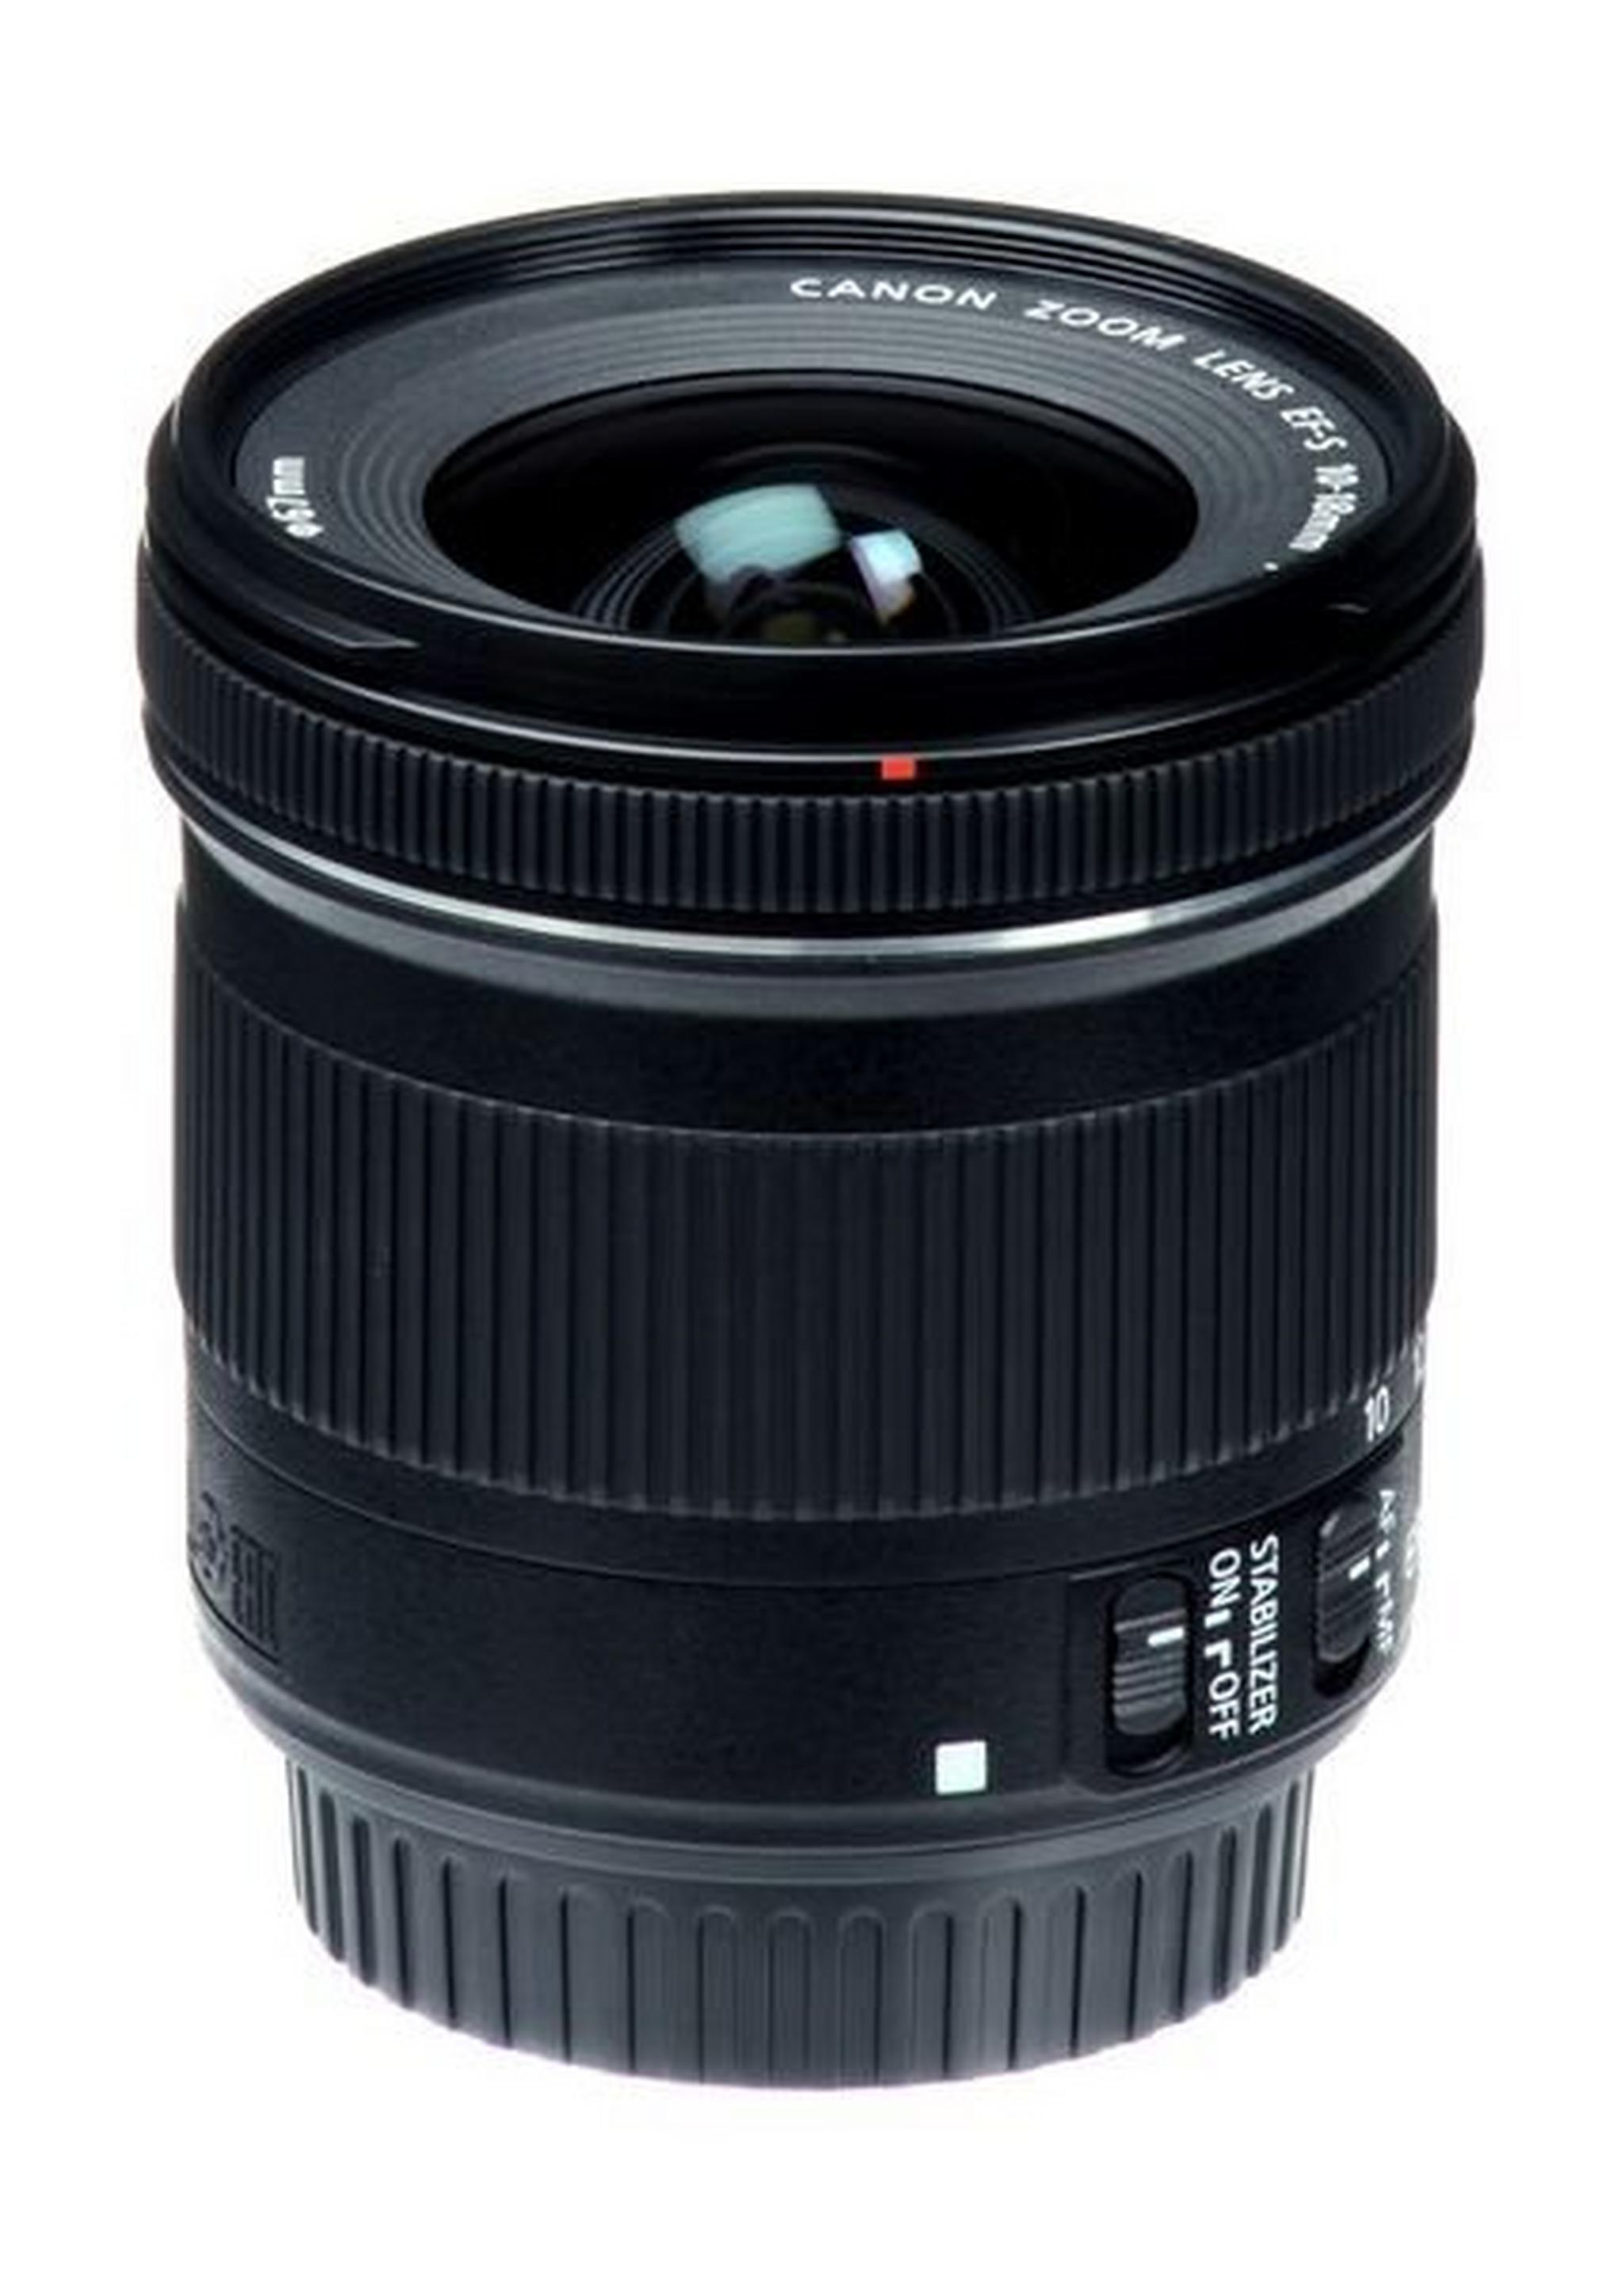 Canon EF-S 10-18mm f/4.5-5.6 IS STM Lens Ultra Wide